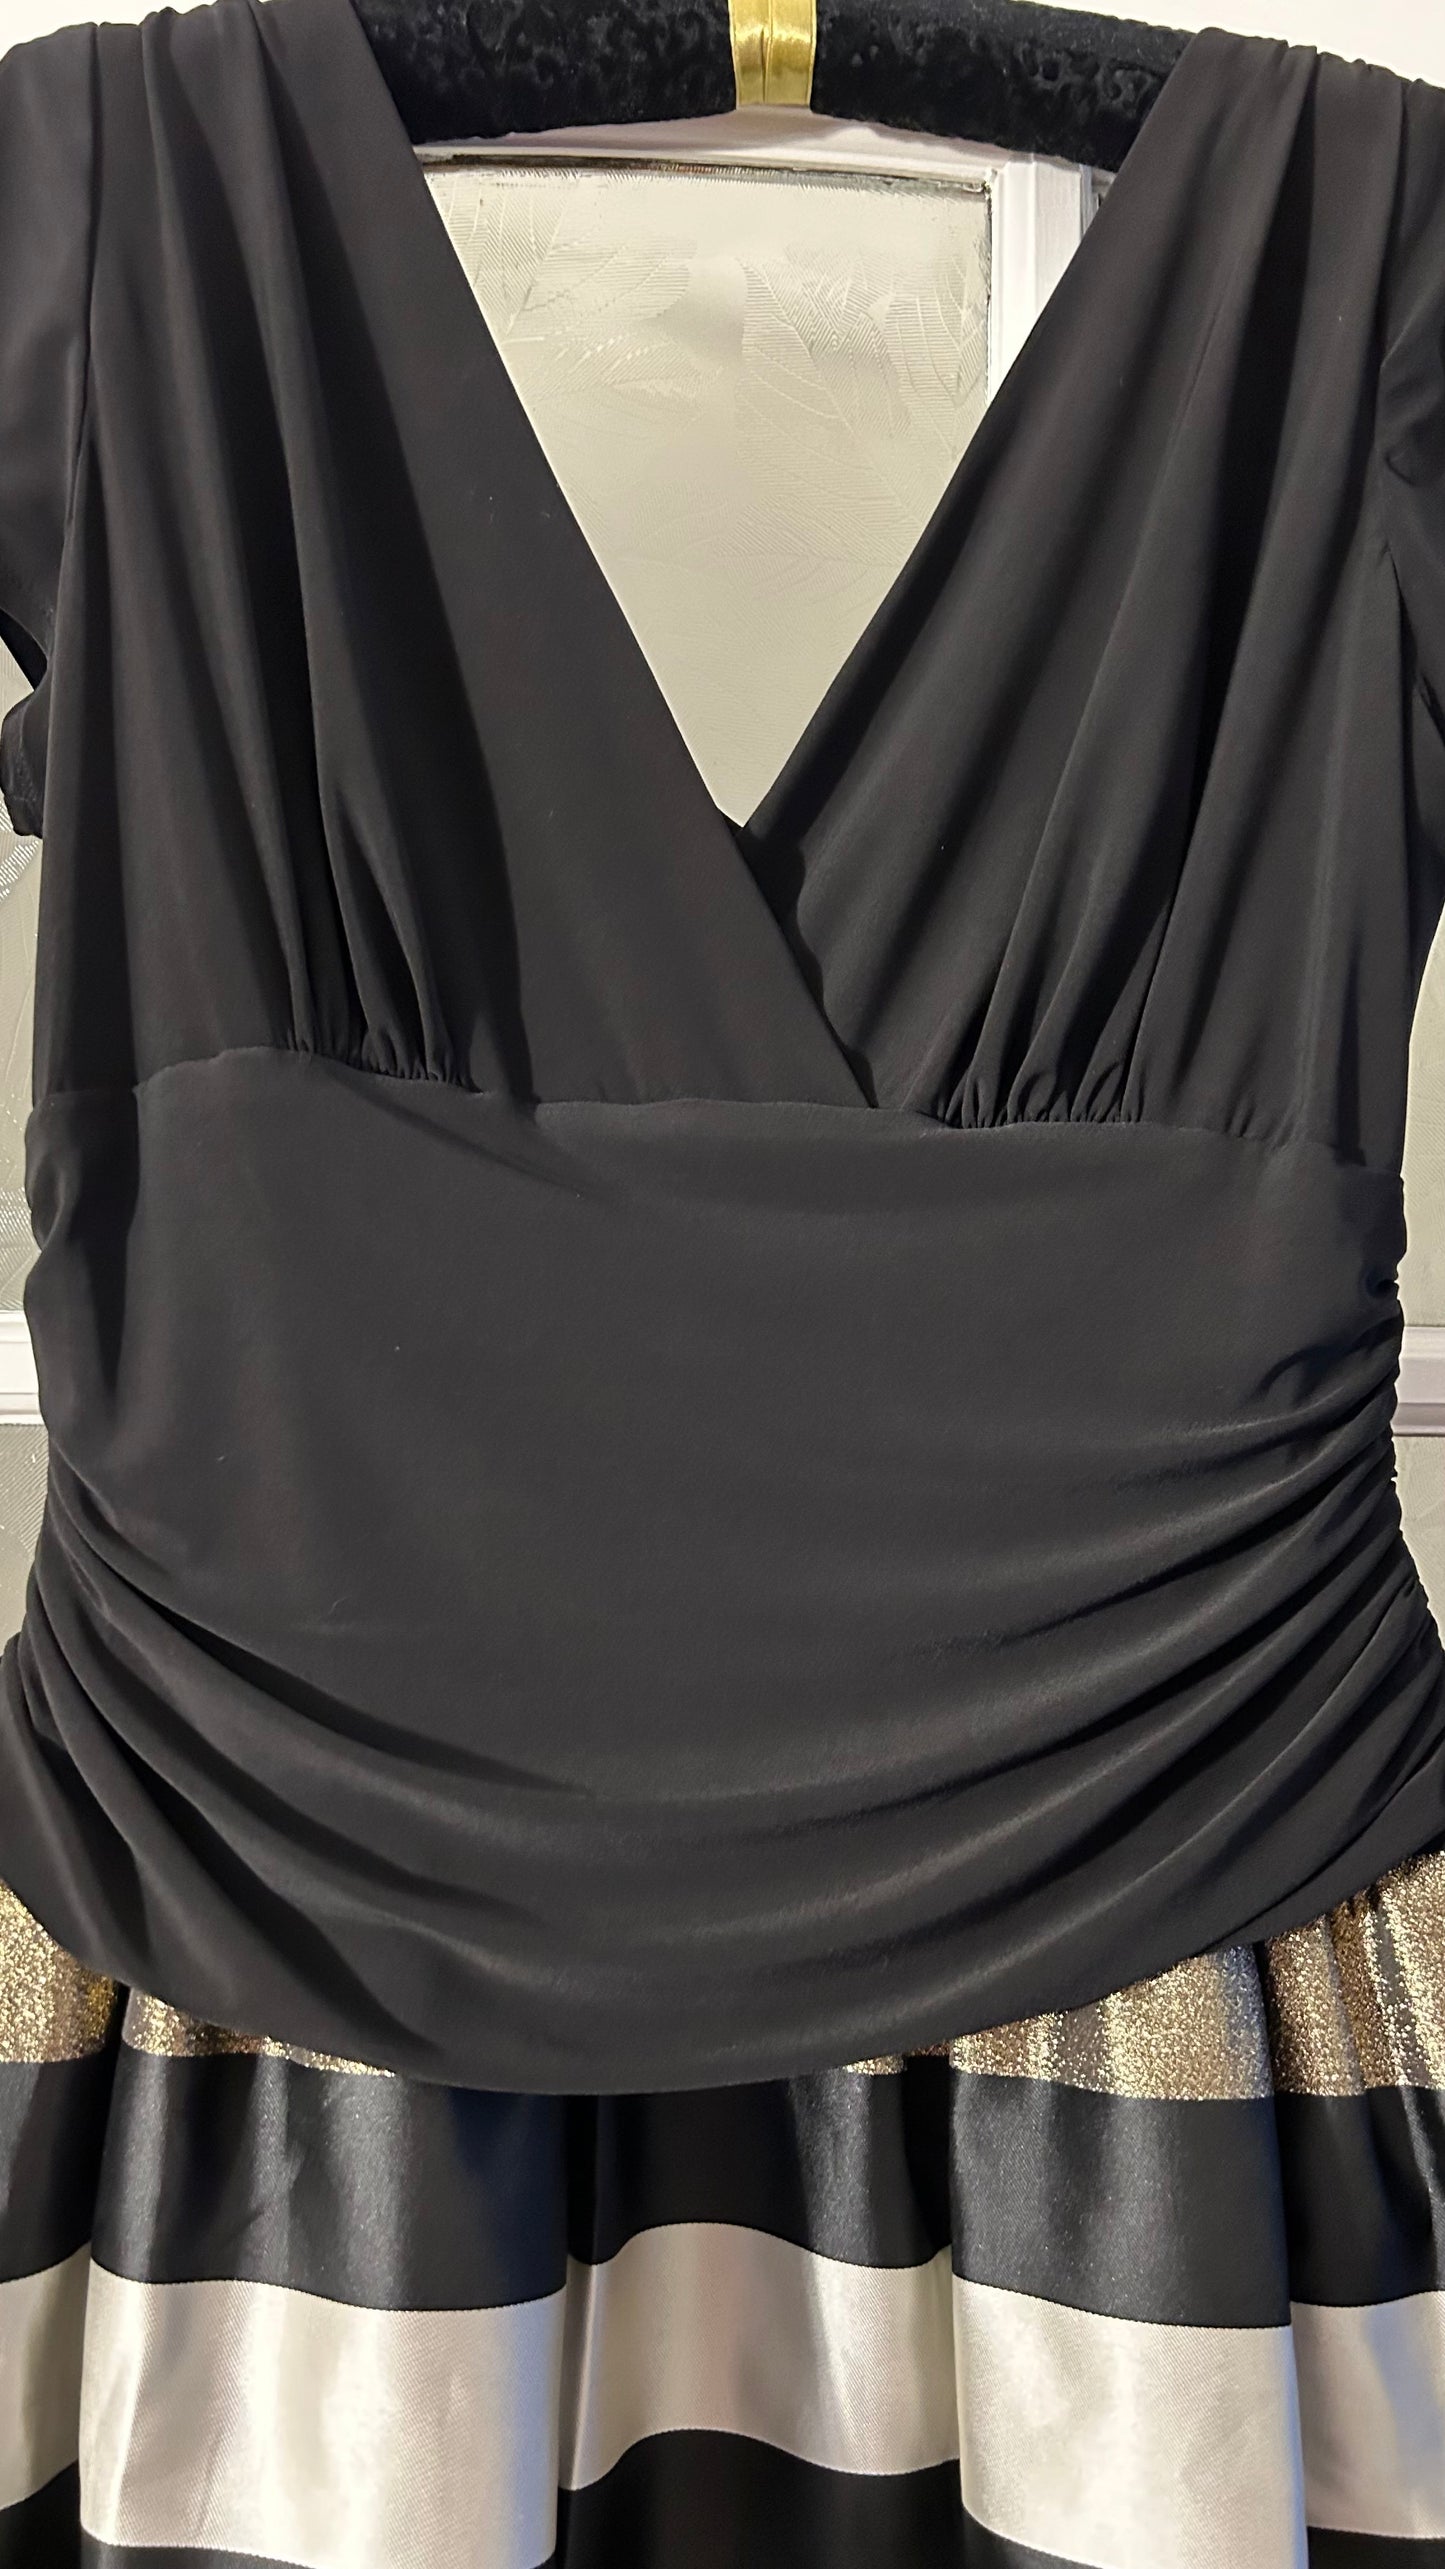 SNLY Occasion Dress Black/Gold 16